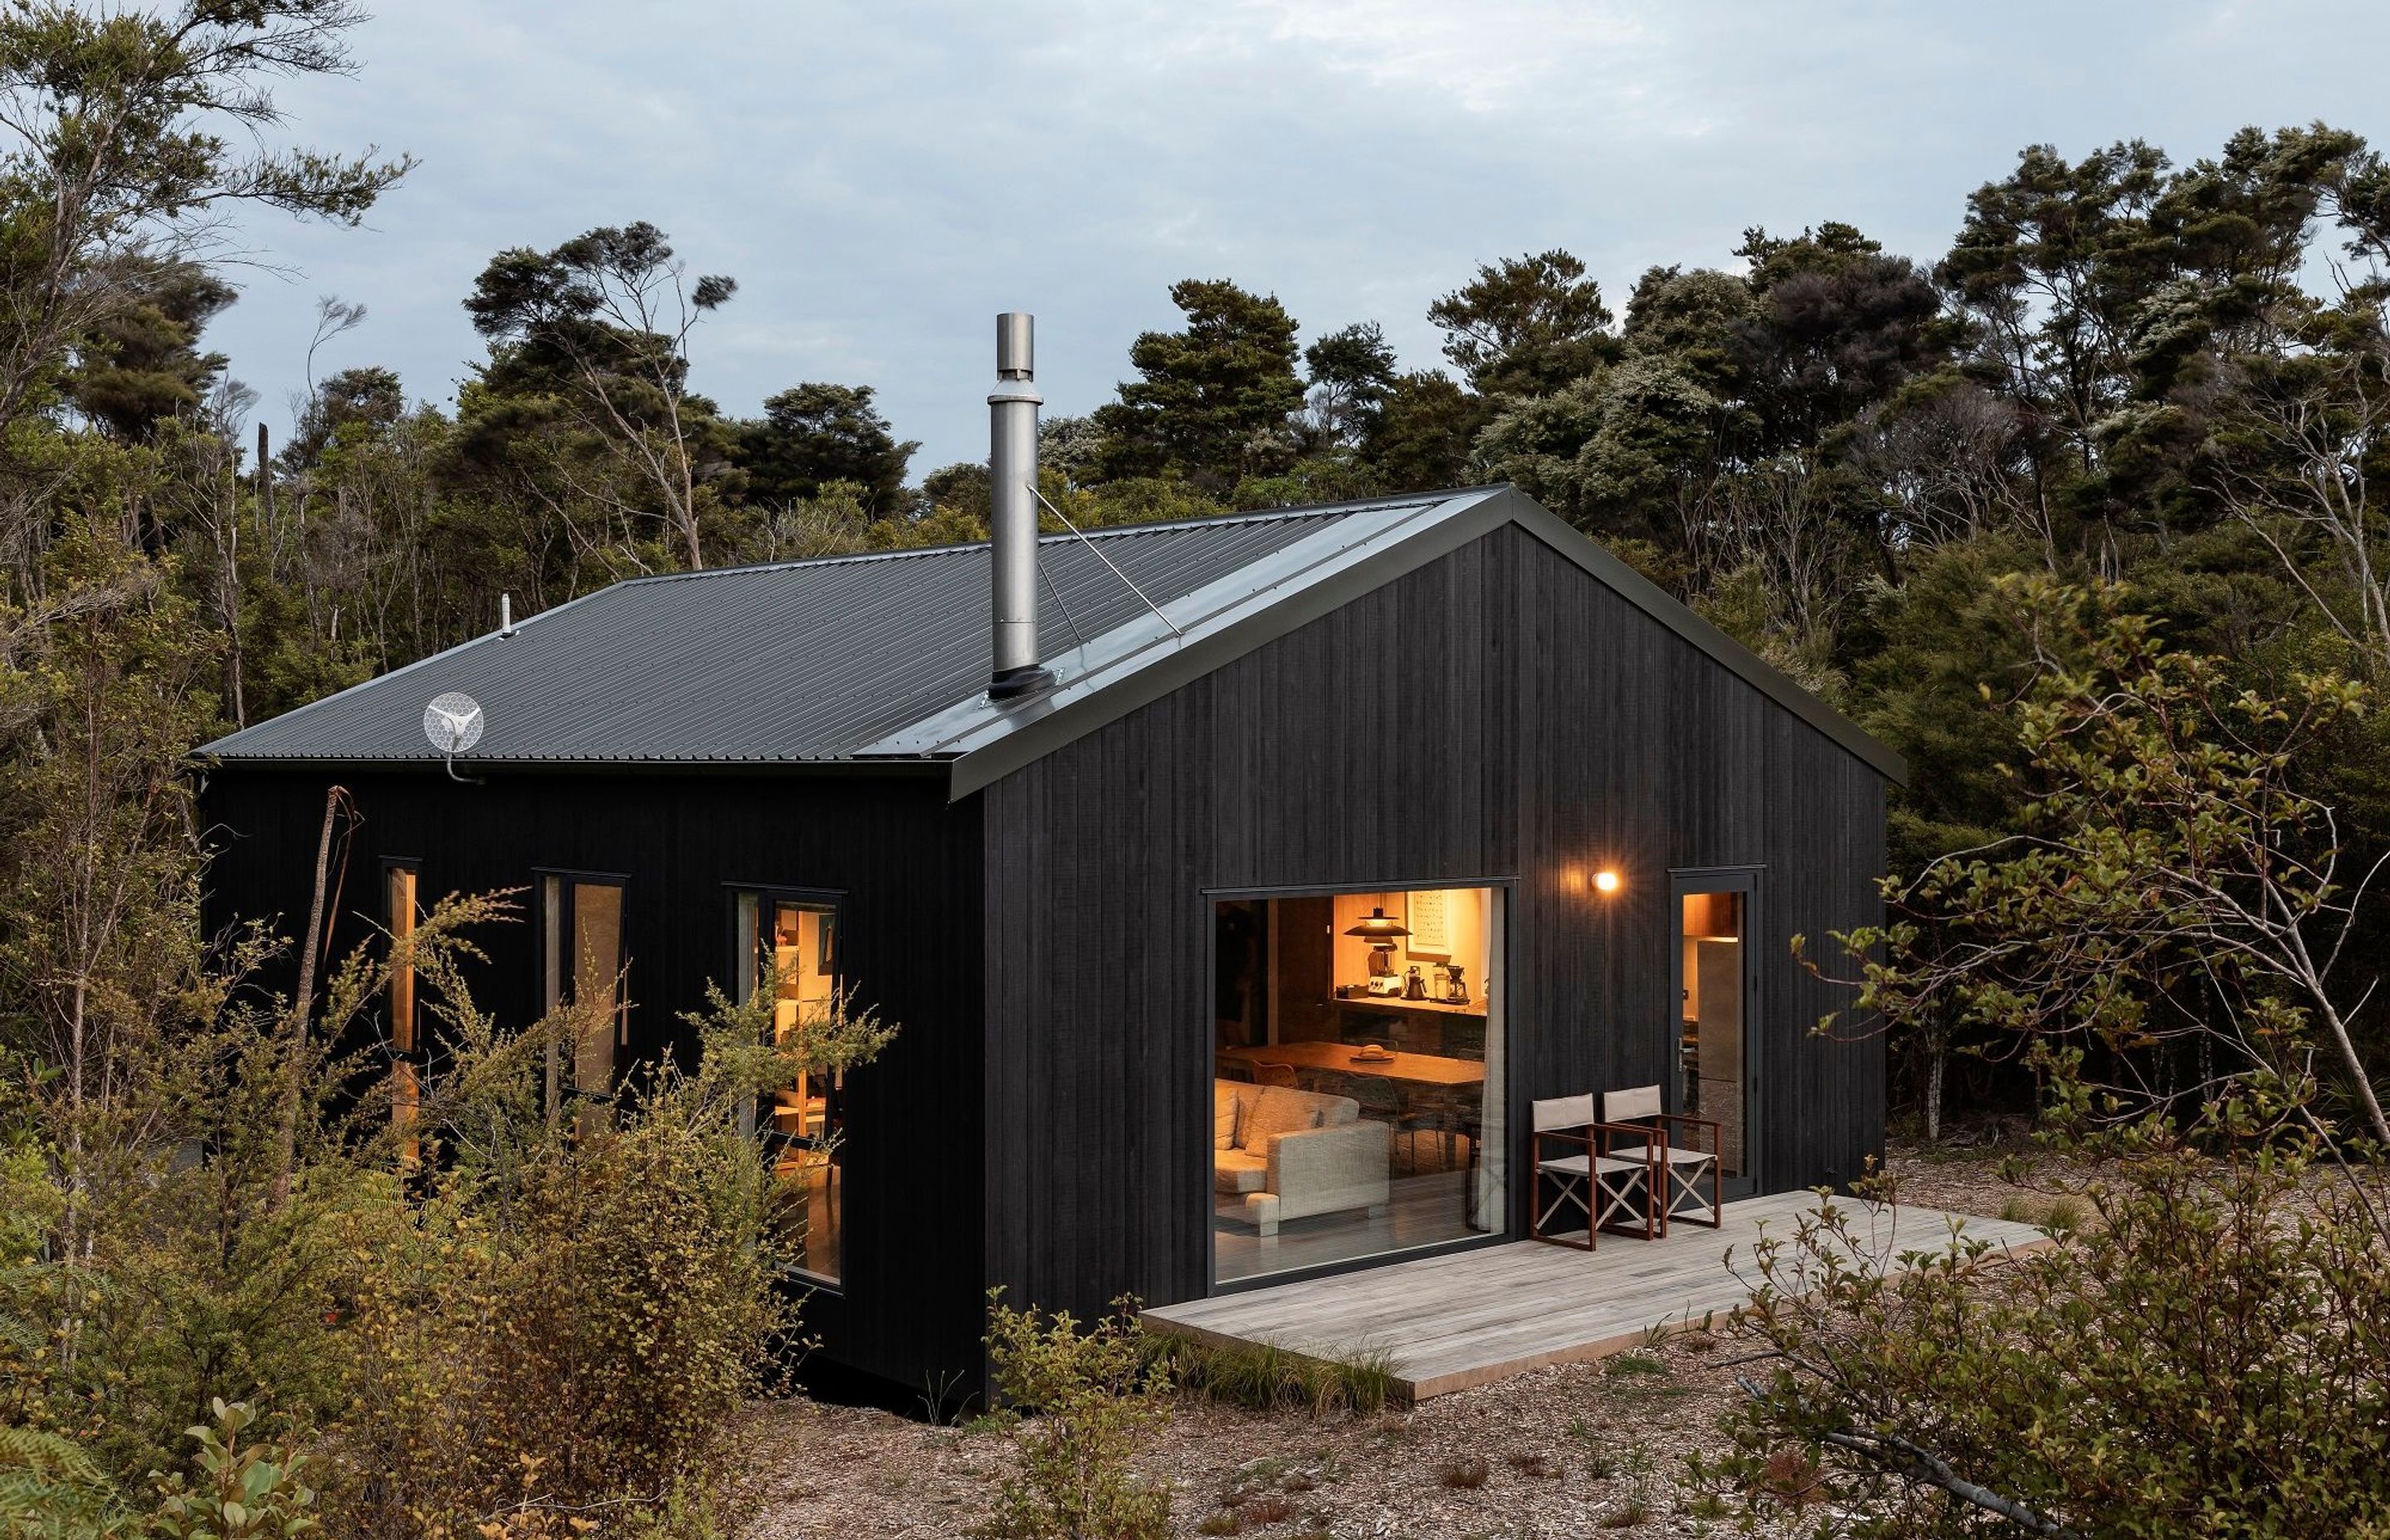 The Abodo cladding and deep green corrugated roof fit perfectly into the native bushcape that surrounds this rural retreat.